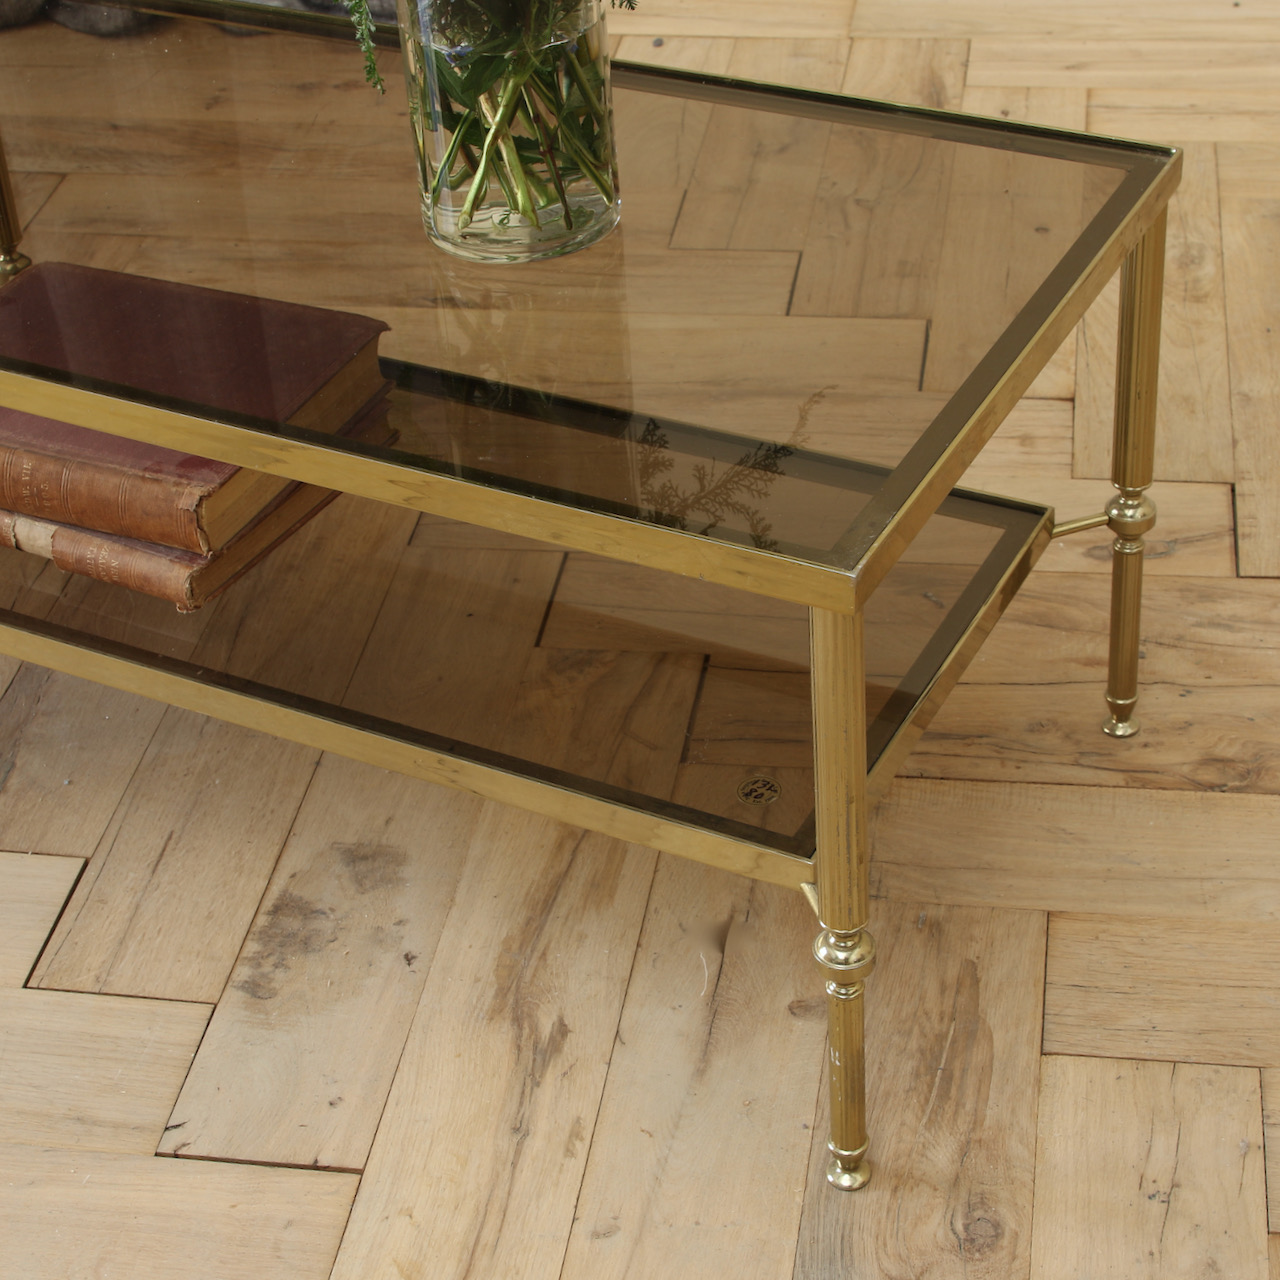 French Brass Coffee Table